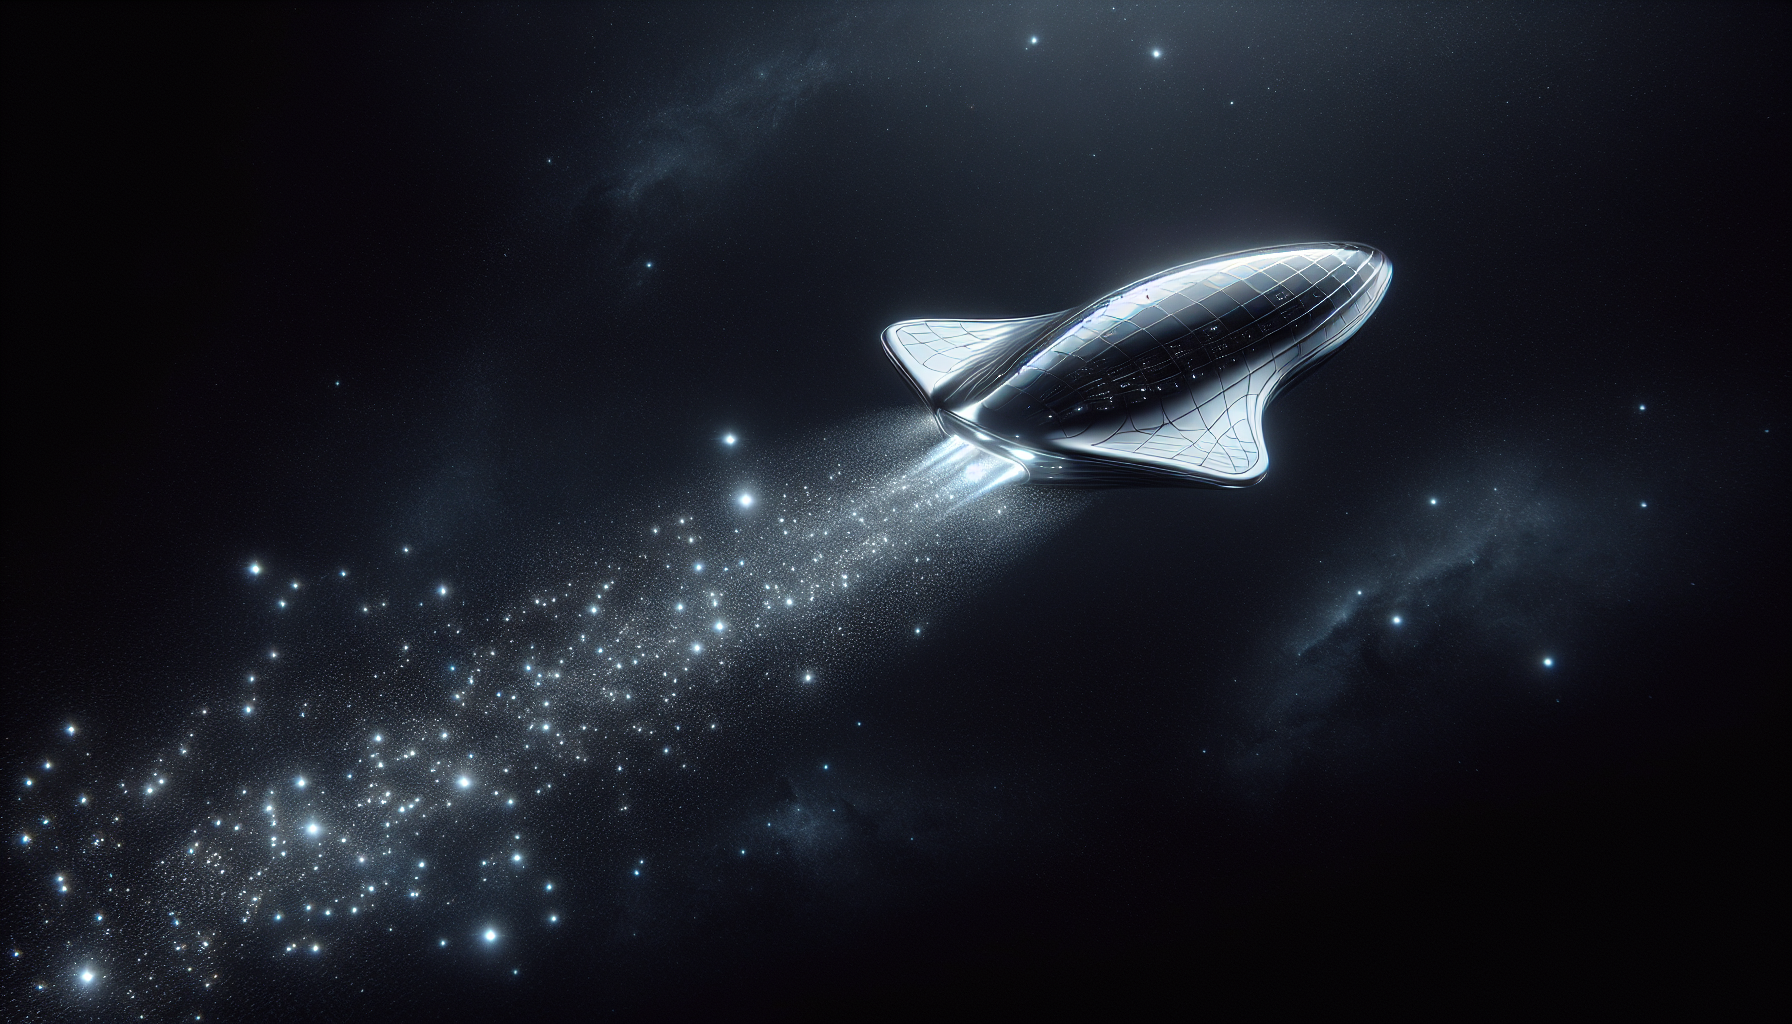 Illustration of a futuristic spaceship traveling through space